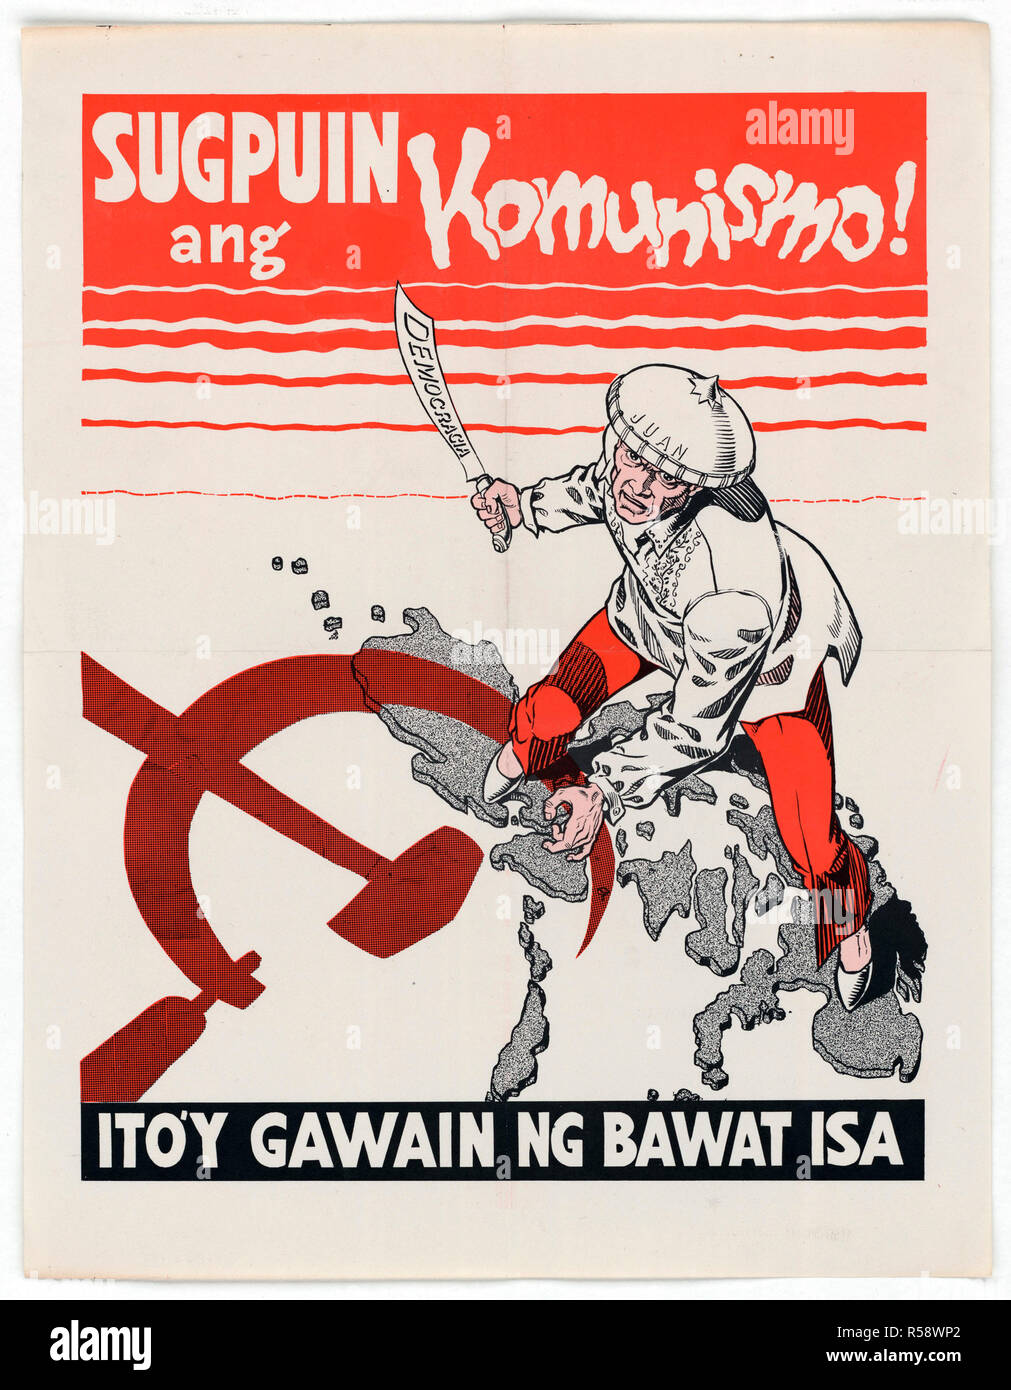 8/13/1951 - U.S. Propaganda Posters in 1950s Asia - Stop Communism poster (written in Tagalog) Stock Photo